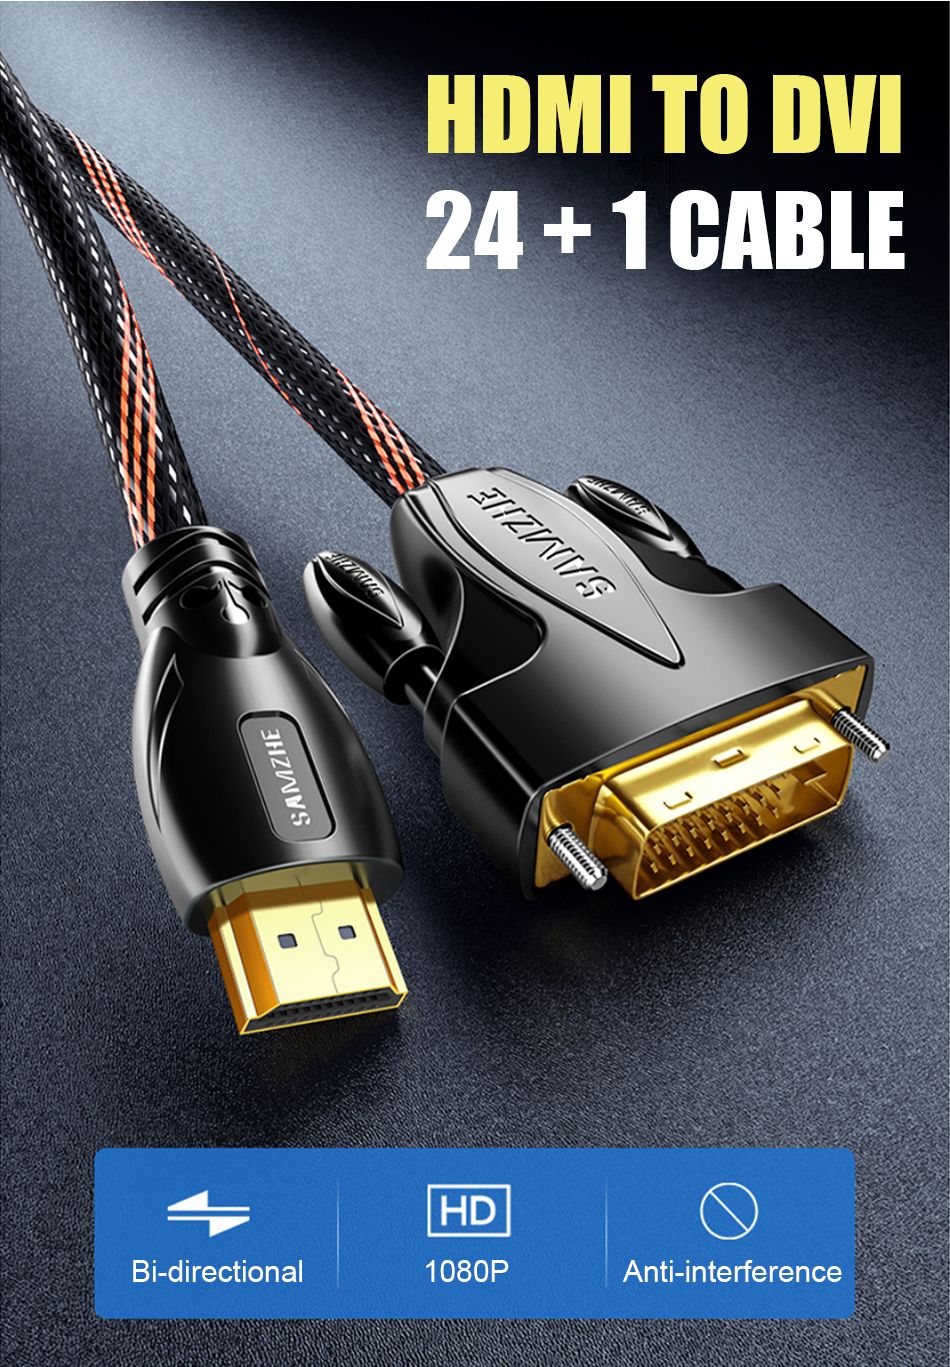 SAMZHE-DVI-to-HDMI-Bi-Directional-HDMI-to-DVI-1080P-HDMI-Cable-Video-Cable-for-Computer-Projector-TV-1650371